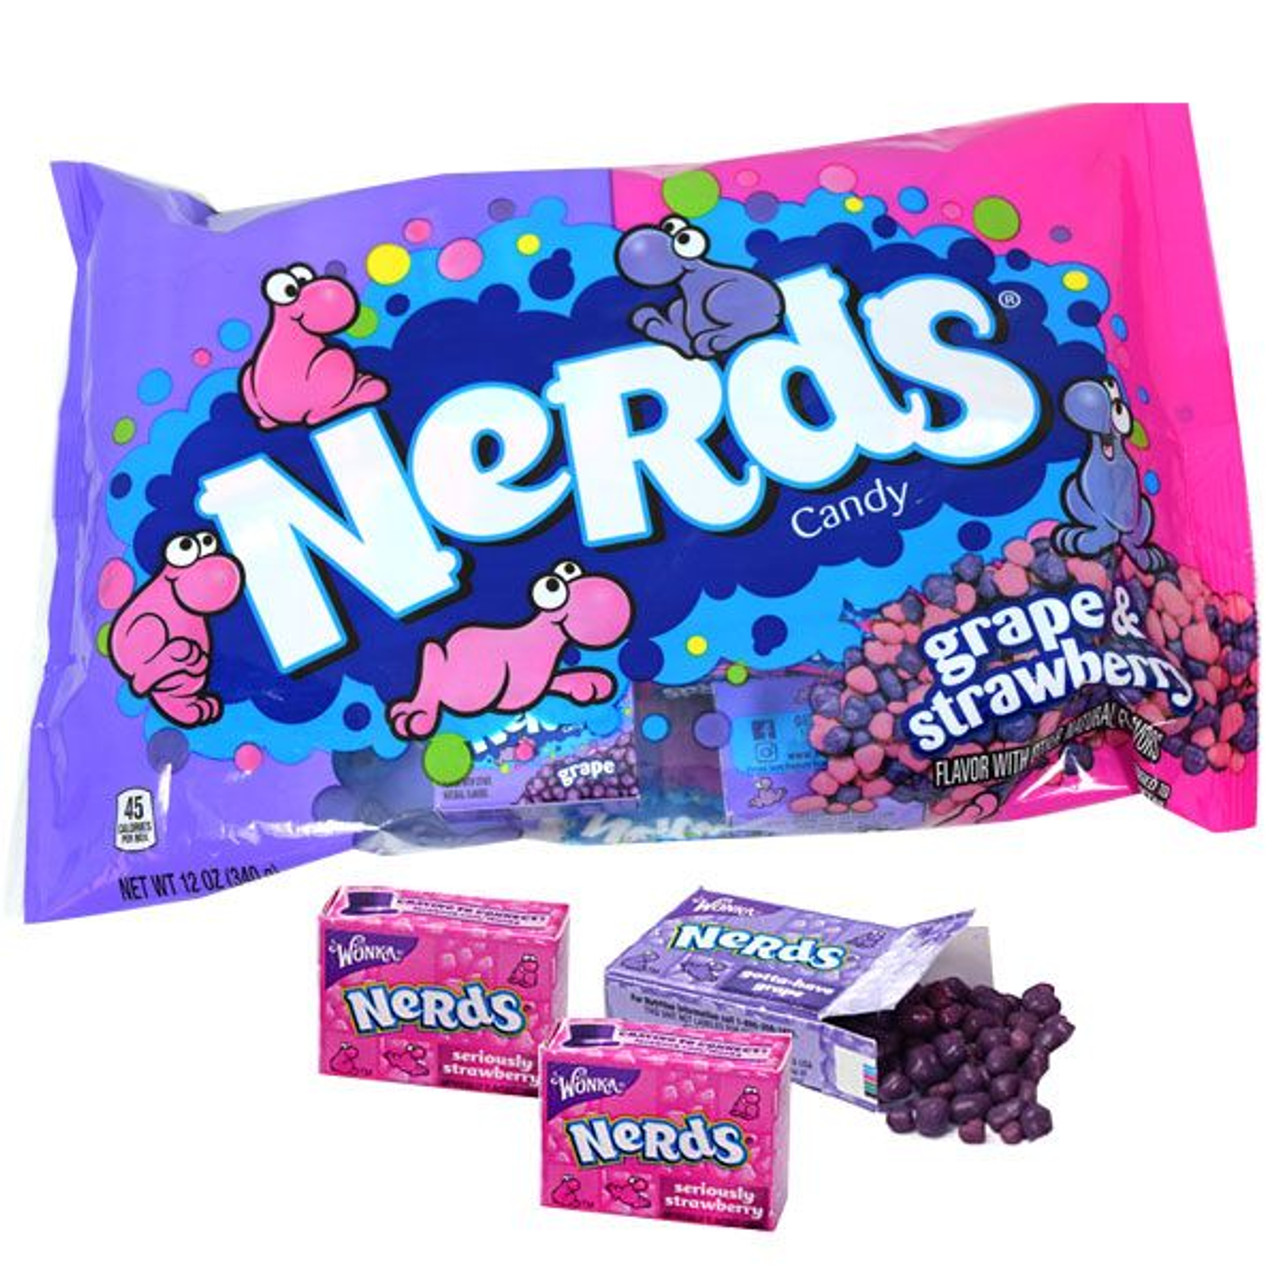 Nerds Grape and Strawberry Candy Laydown Bag, 12 oz